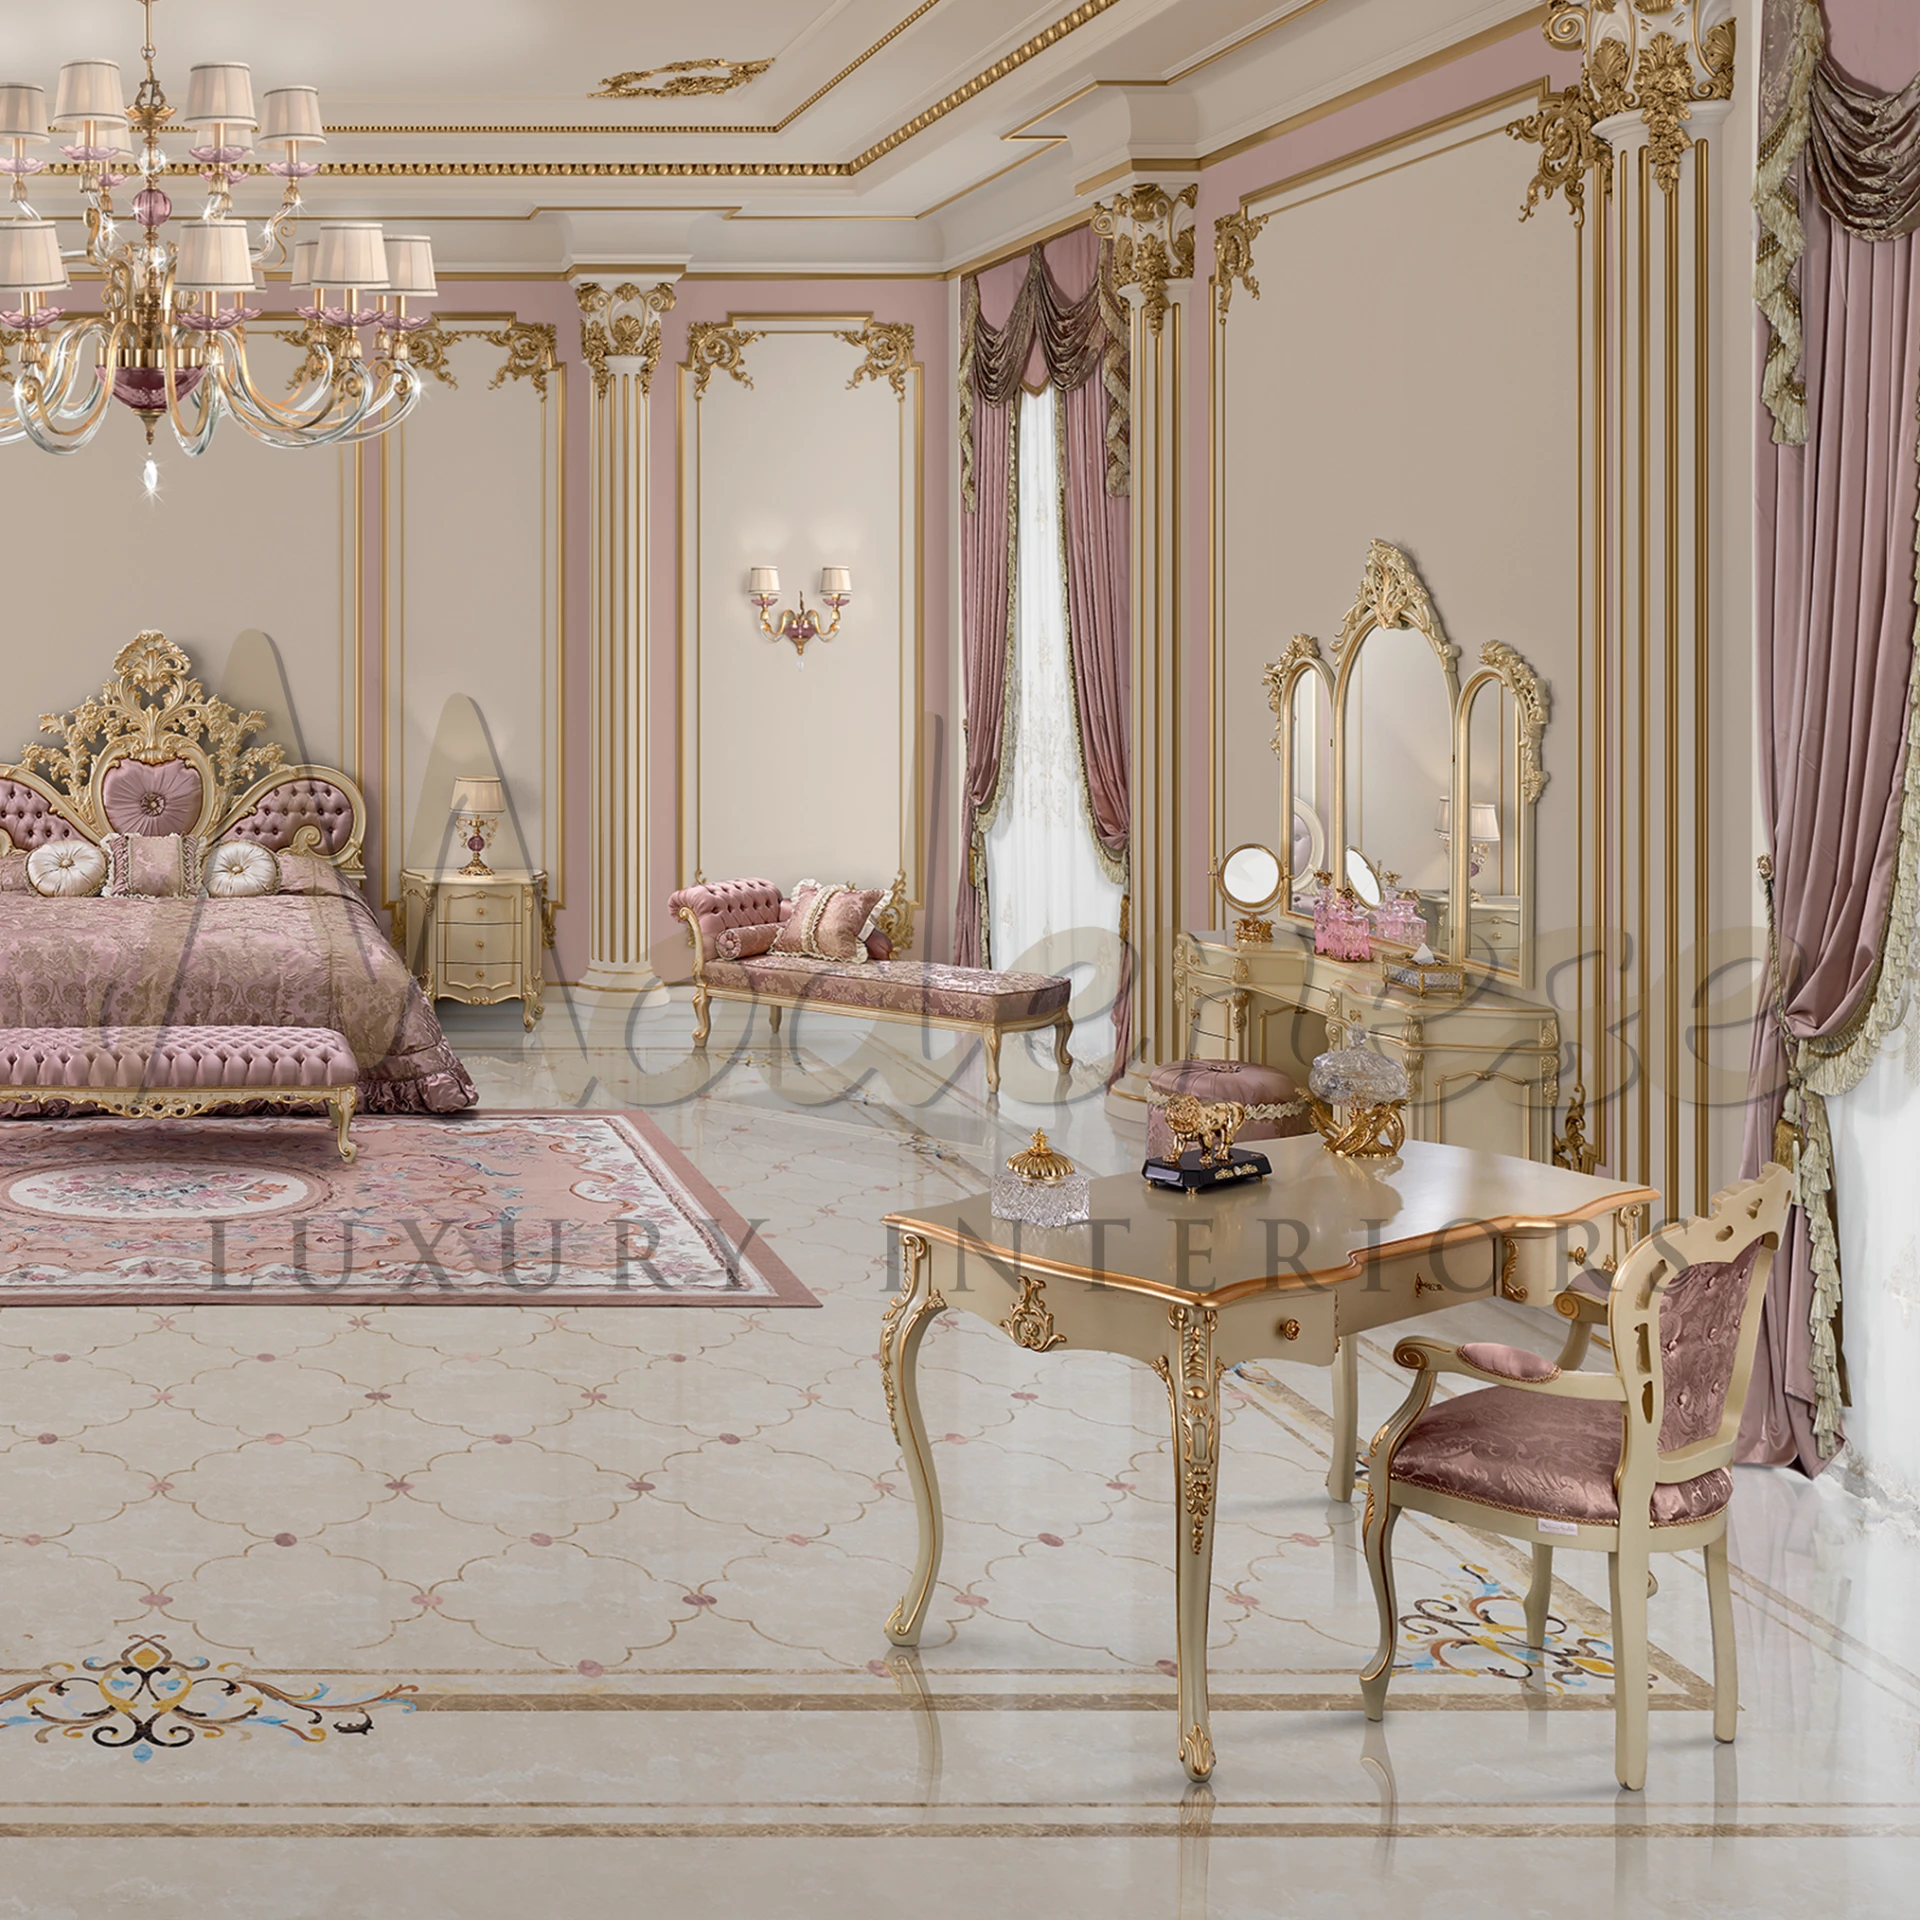 Luxurious Bedroom with detailed, ornate design featuring a fancy bed, luxury furniture, and sophisticated lighting.